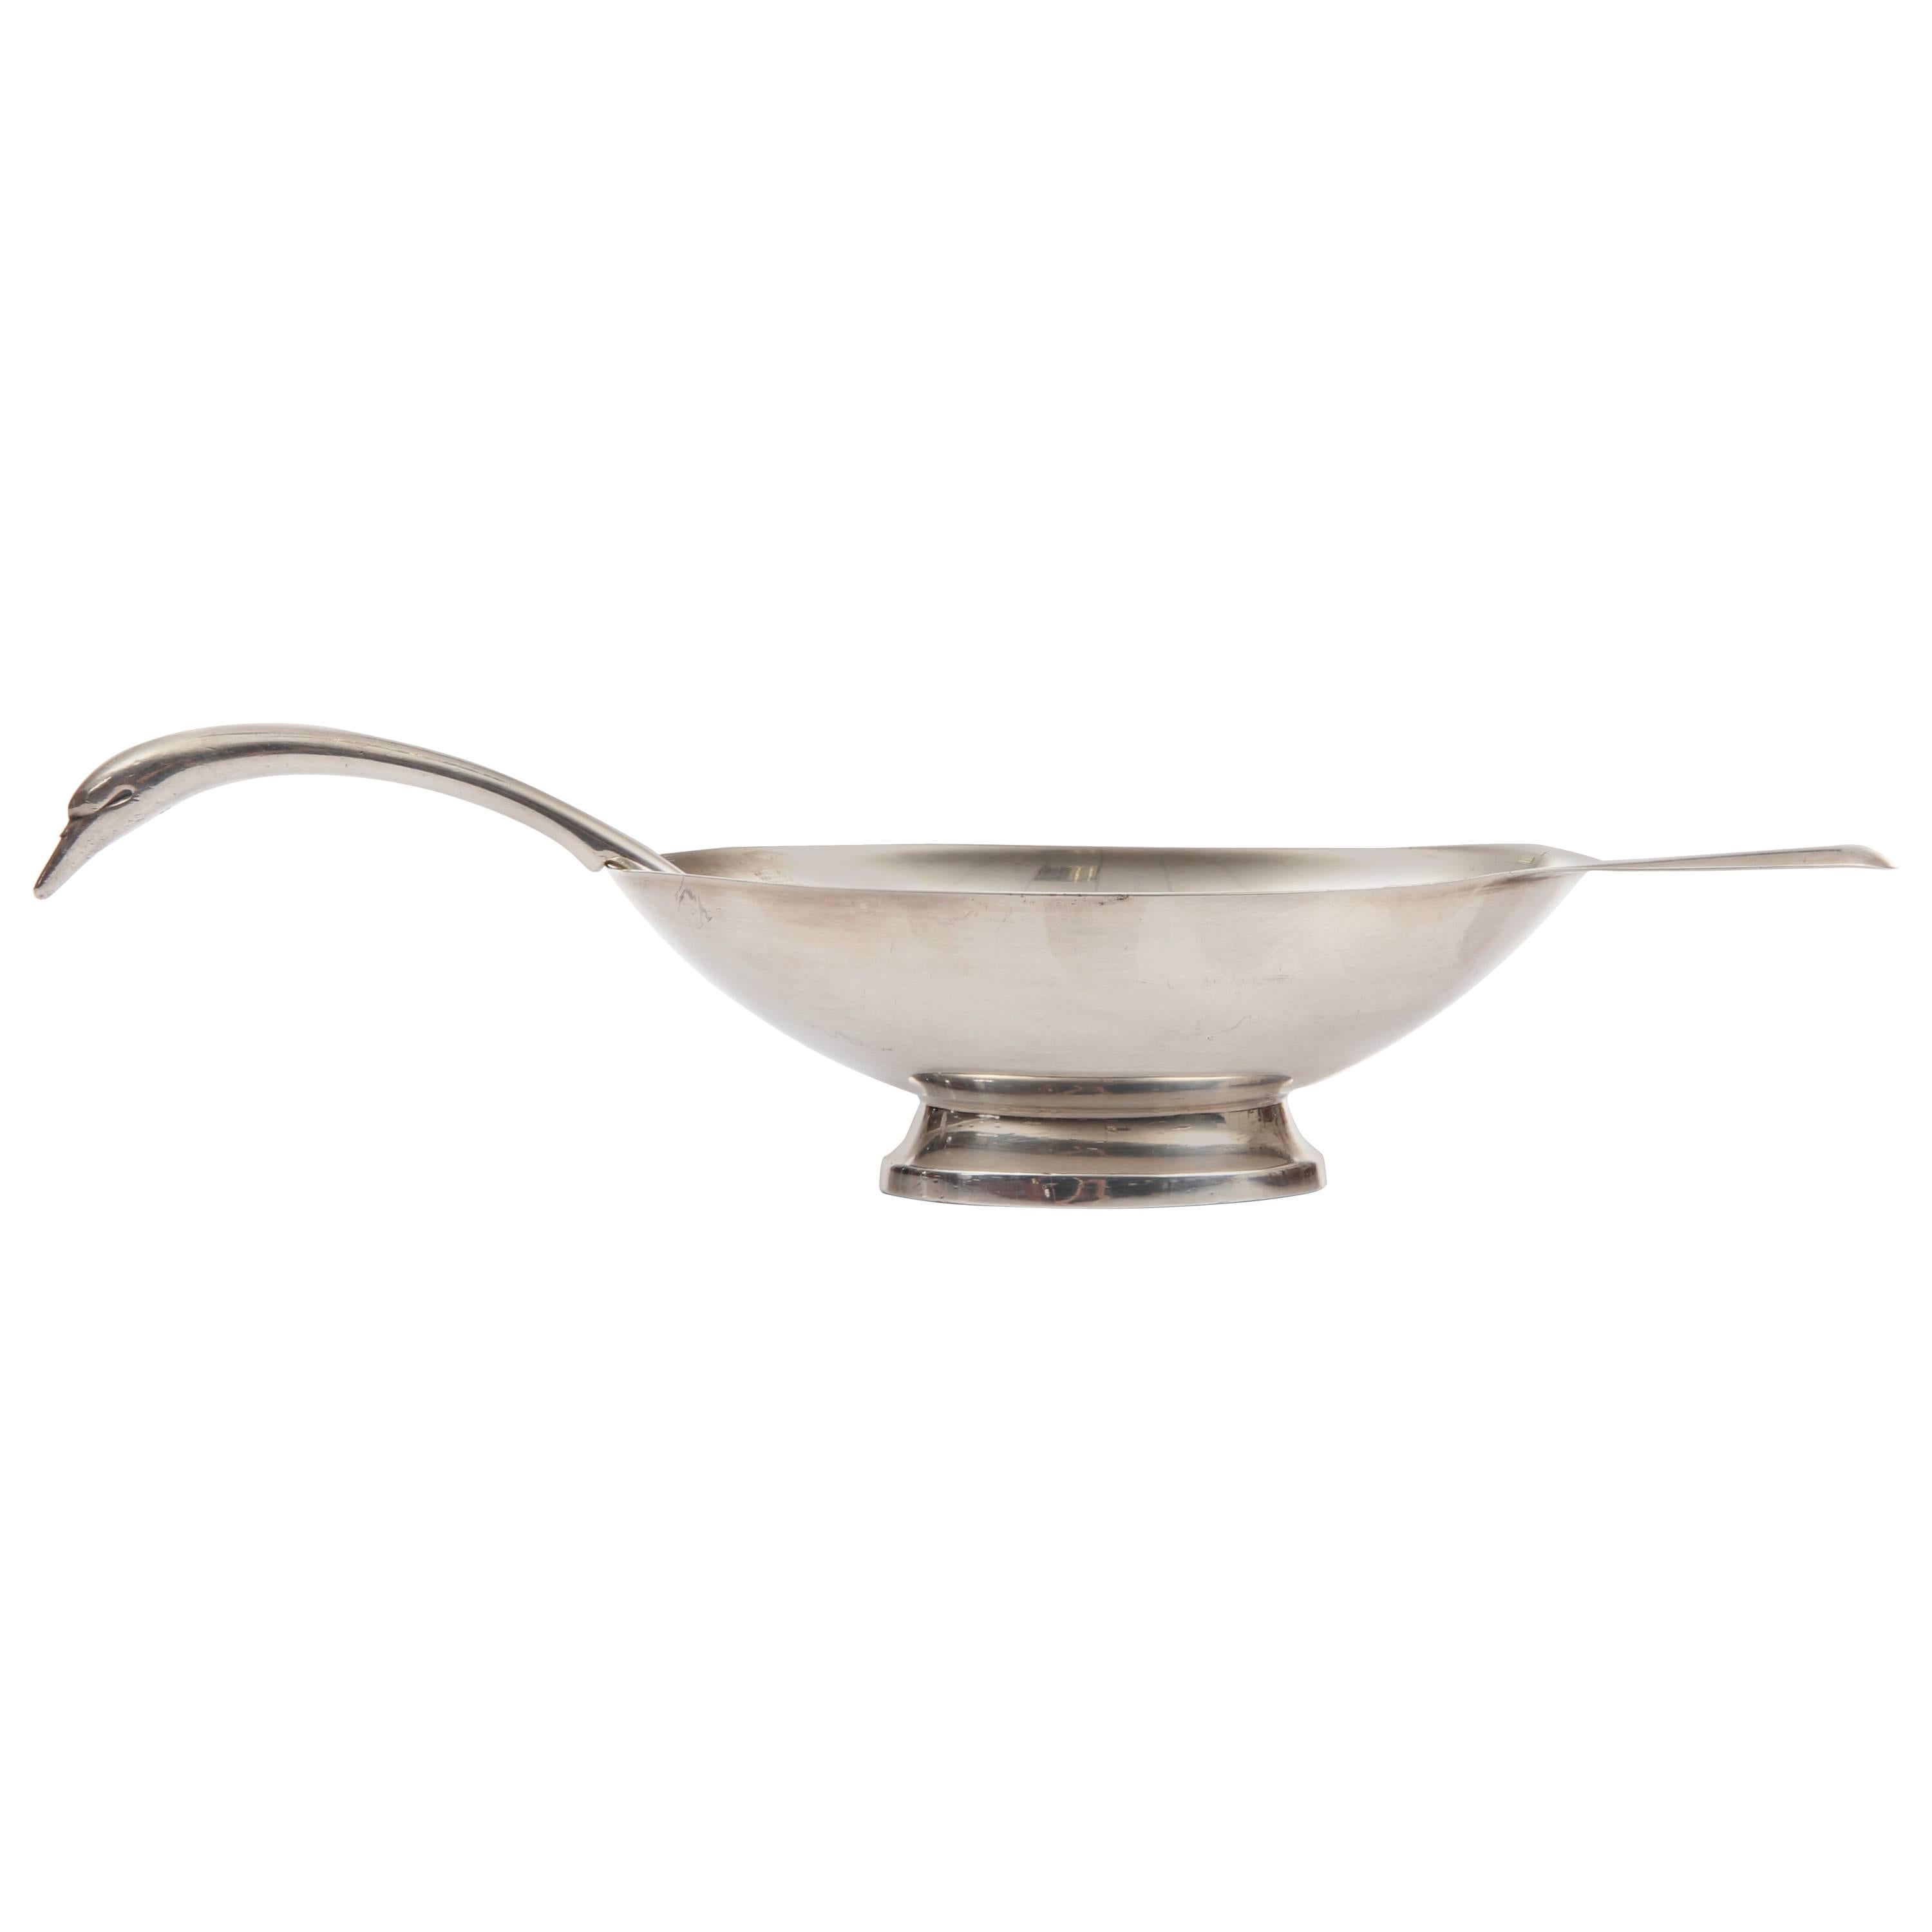 Sauceboat "Swan" with Serving Ladle in Silver Plated by Christian Fjerdingstad